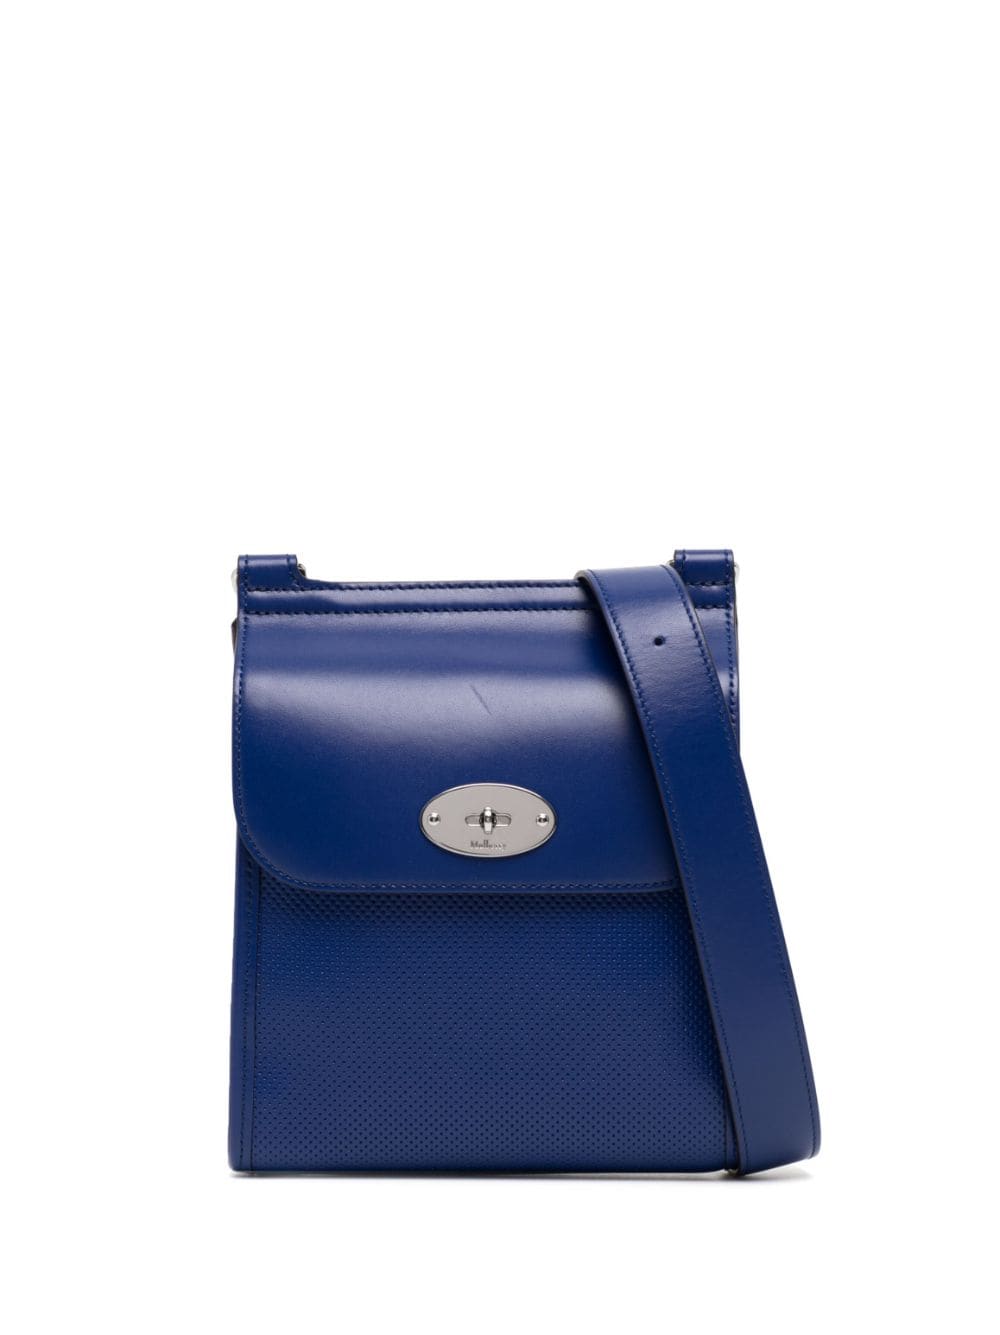 Mulberry Small Antony Leather Messenger Bag In Blue | ModeSens